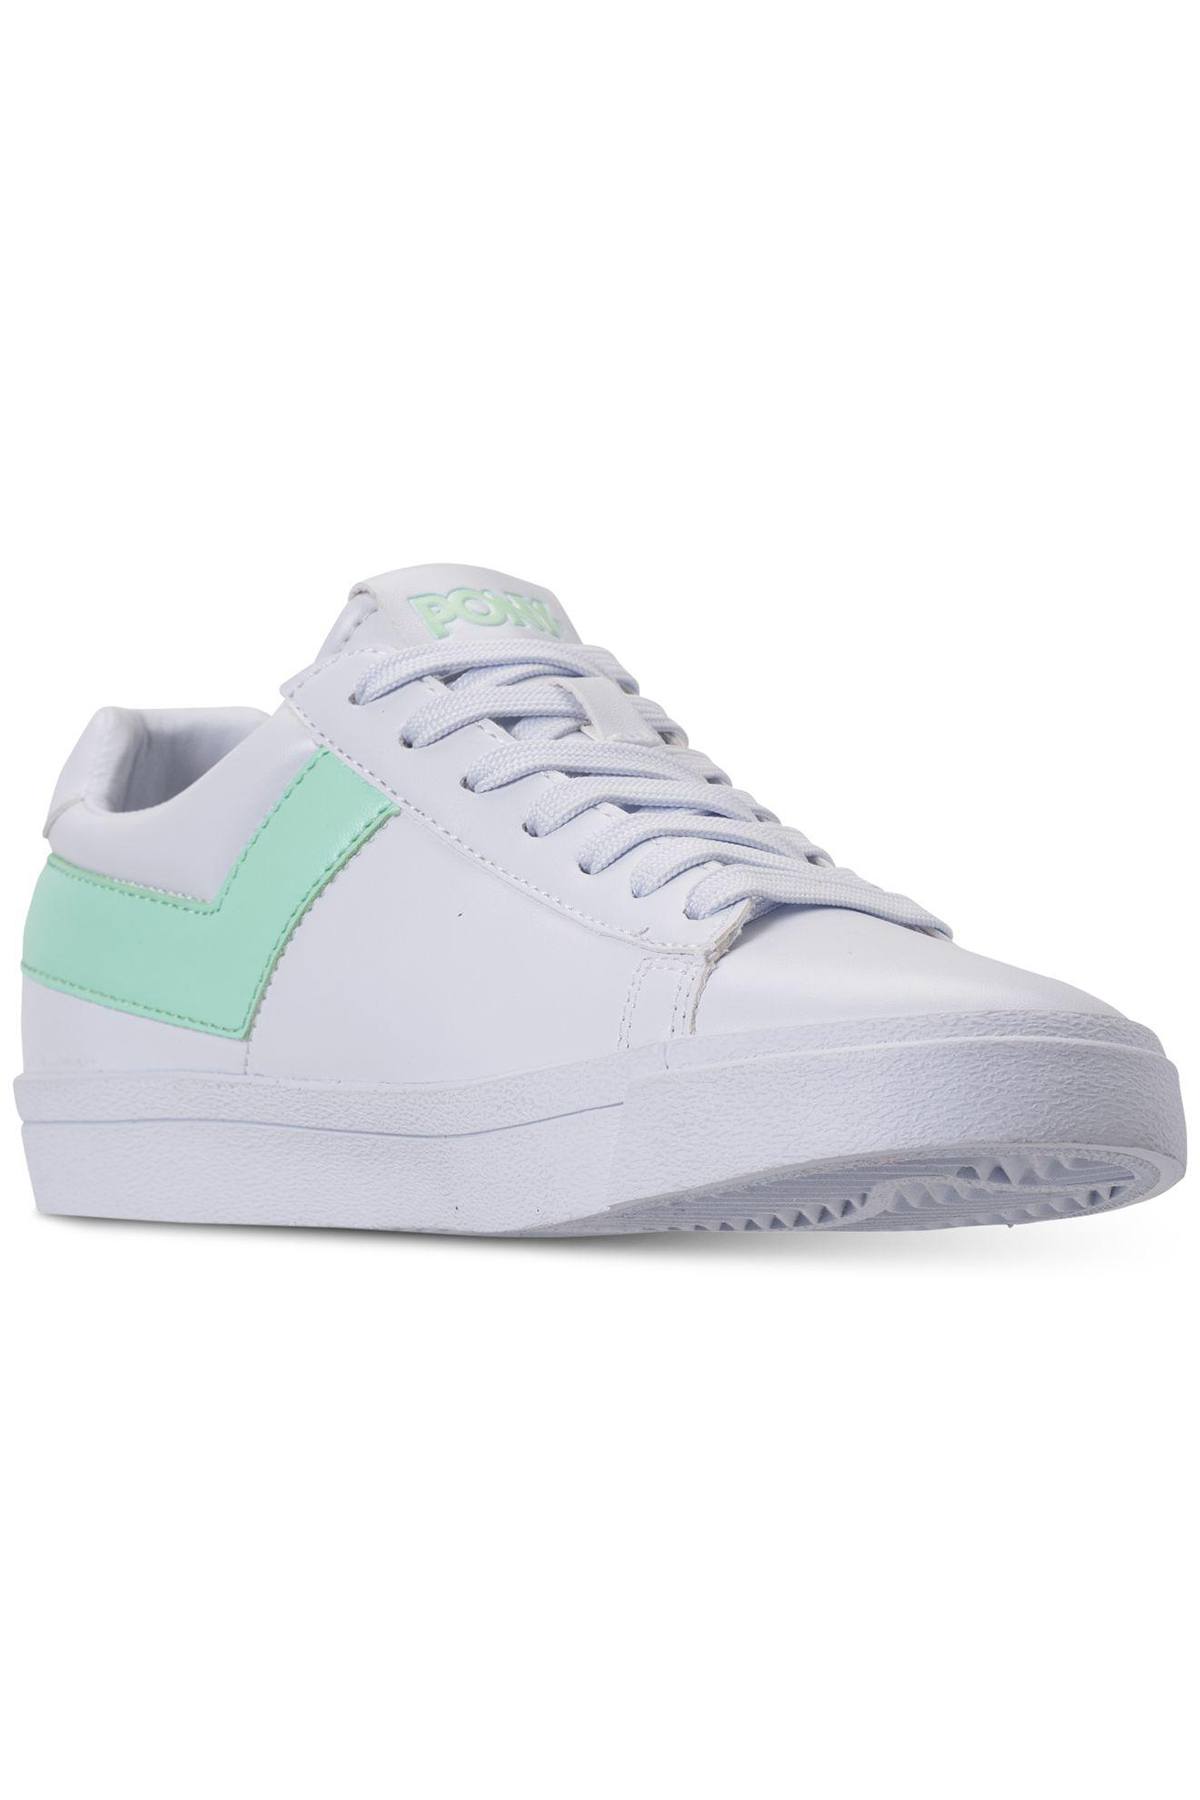 Pony White/Mint Top-Star Core Sneakers – CheapUndies